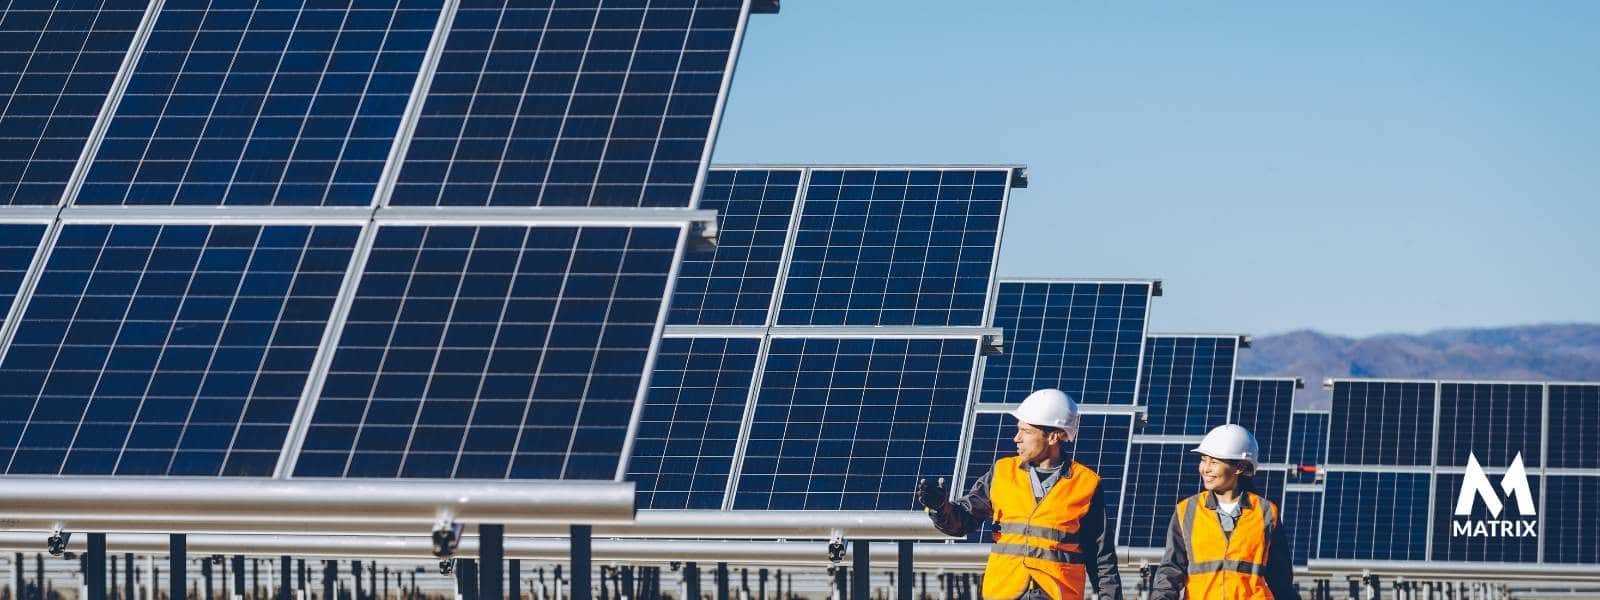 What is a solar company?